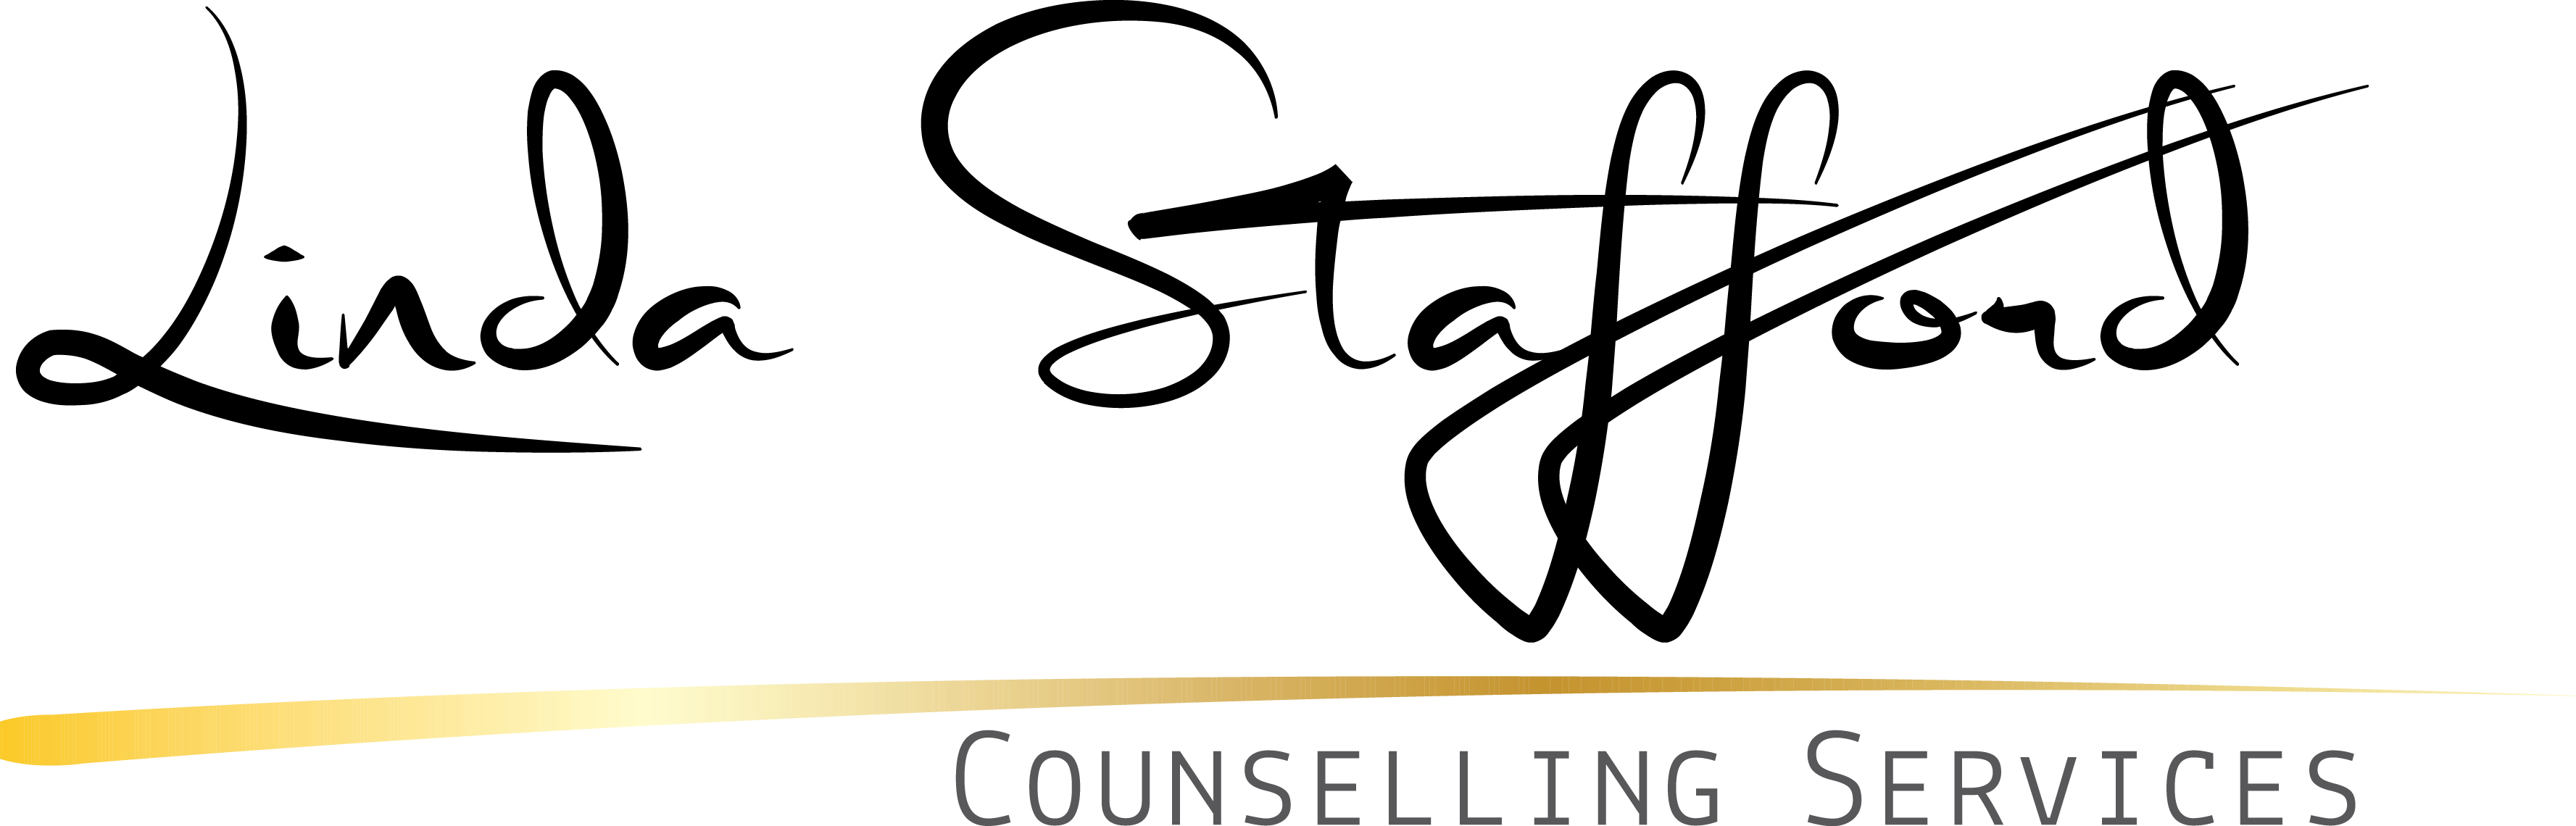 Linda Stafford Counselling Services